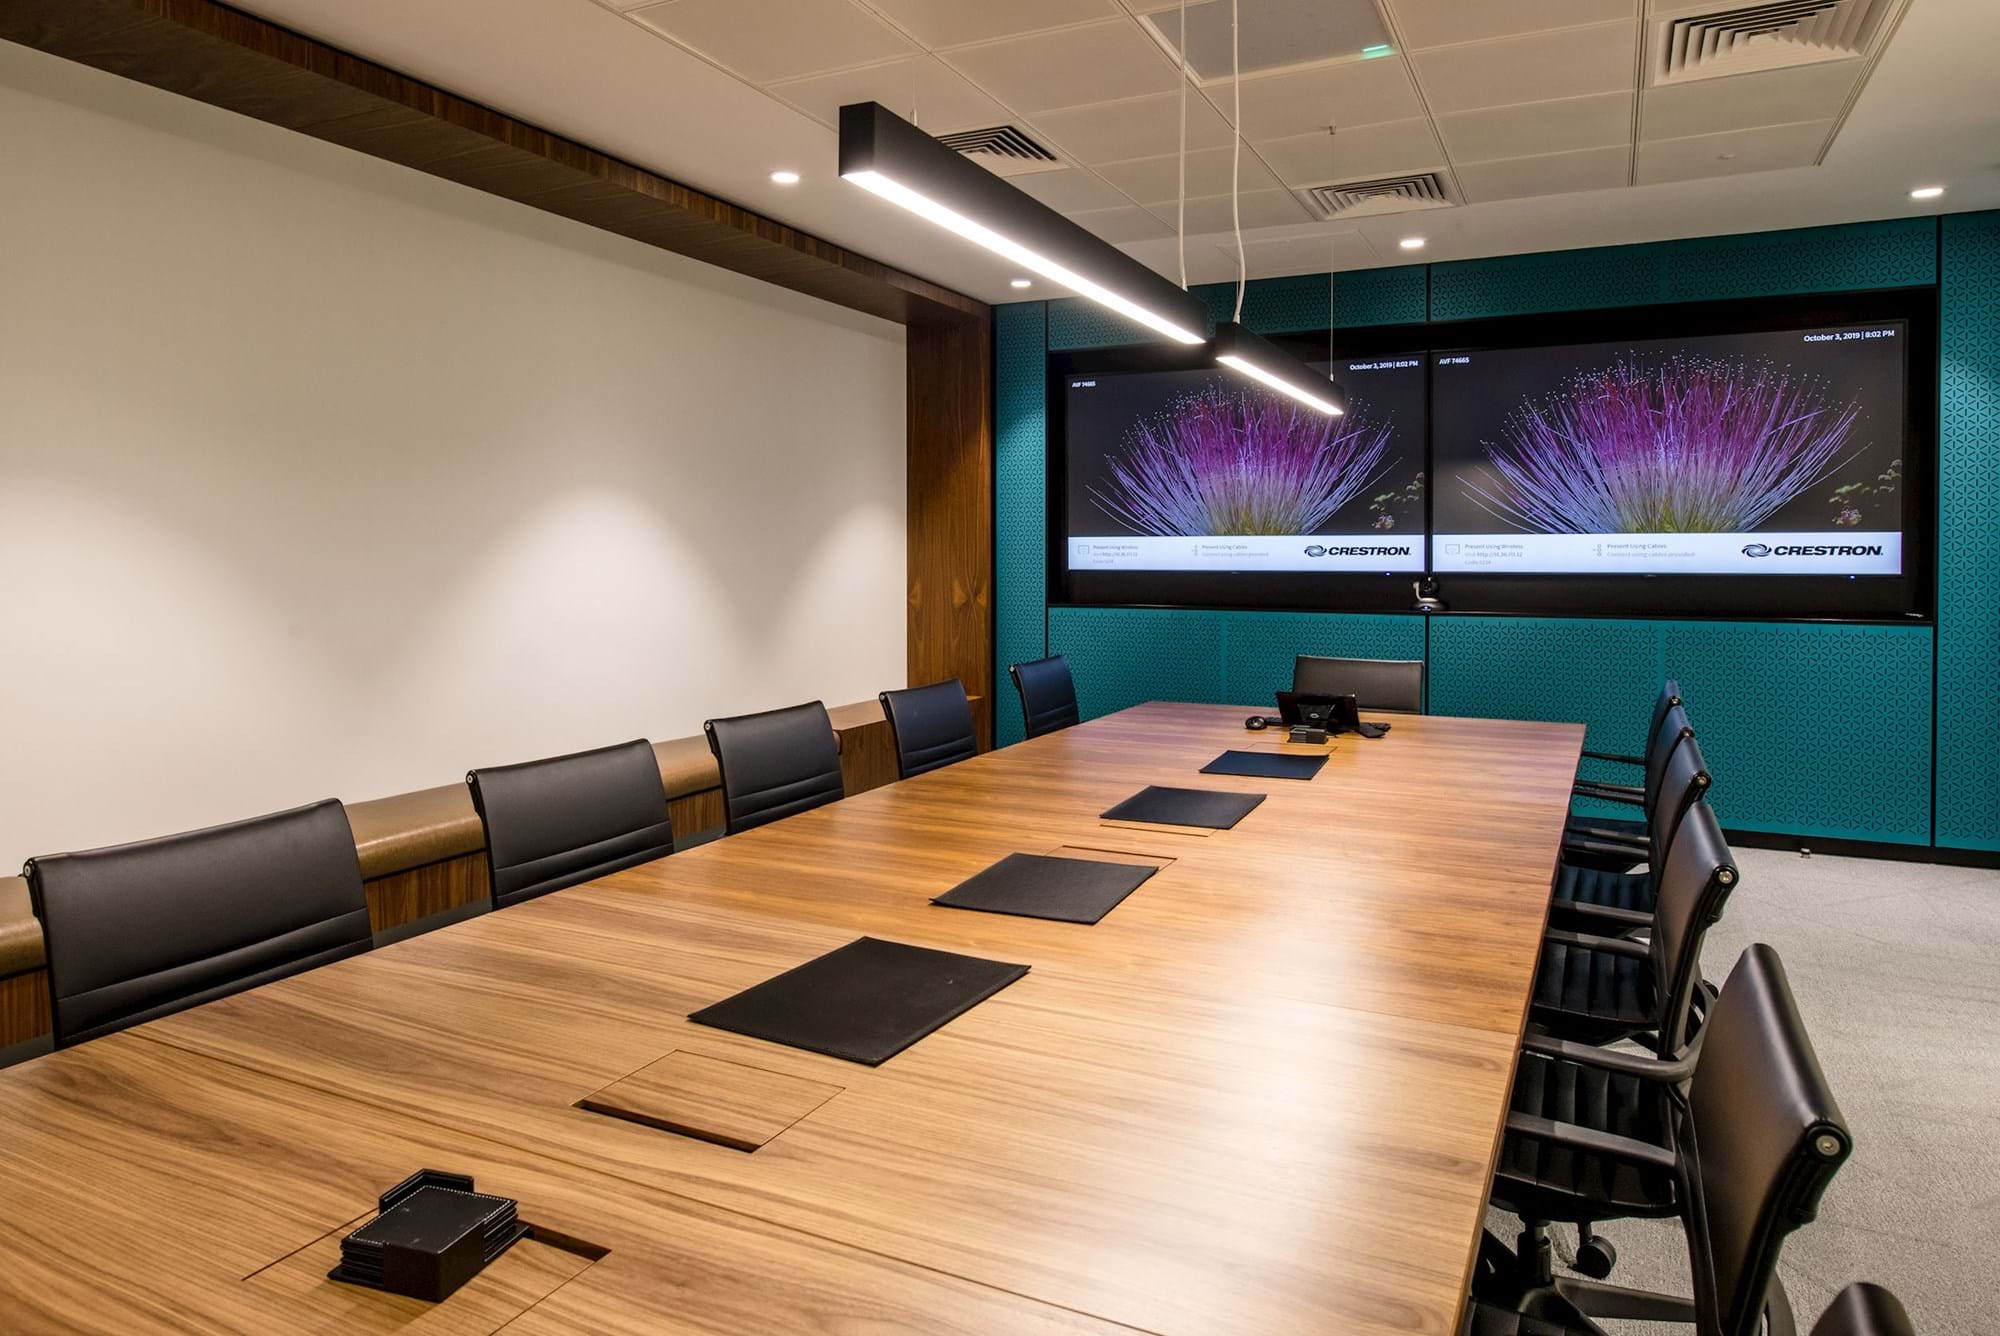 Modus Workspace office design, fit out and refurbishment - Charles River Associates Cambridge - Modus-Charles-Rivers-Associates-Cambridge-9.jpg